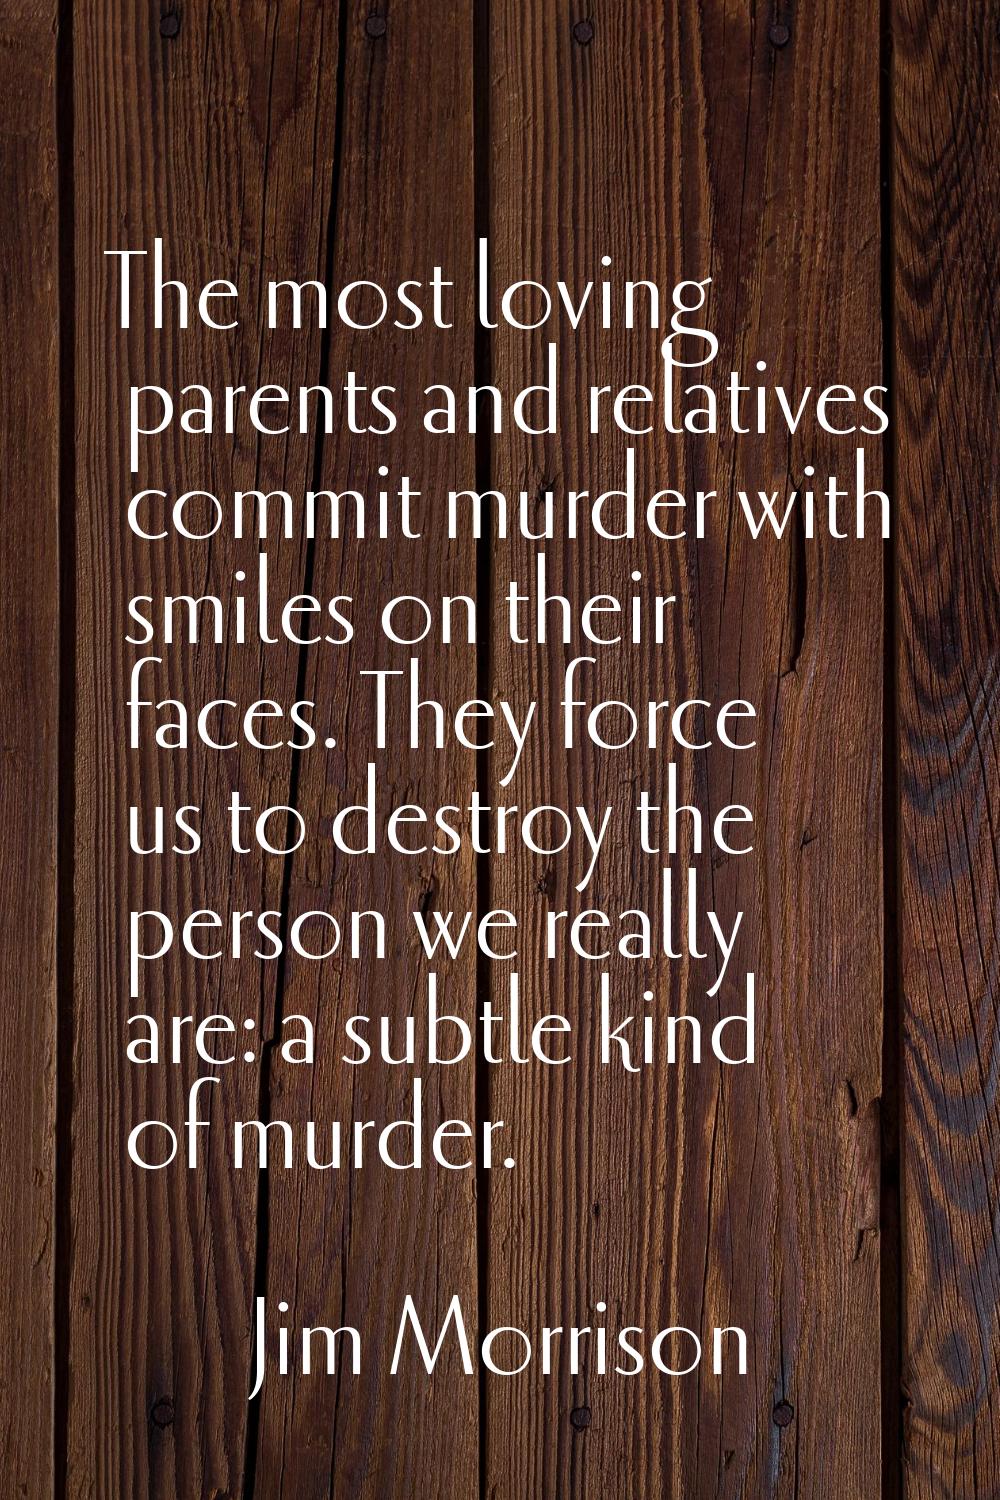 The most loving parents and relatives commit murder with smiles on their faces. They force us to de